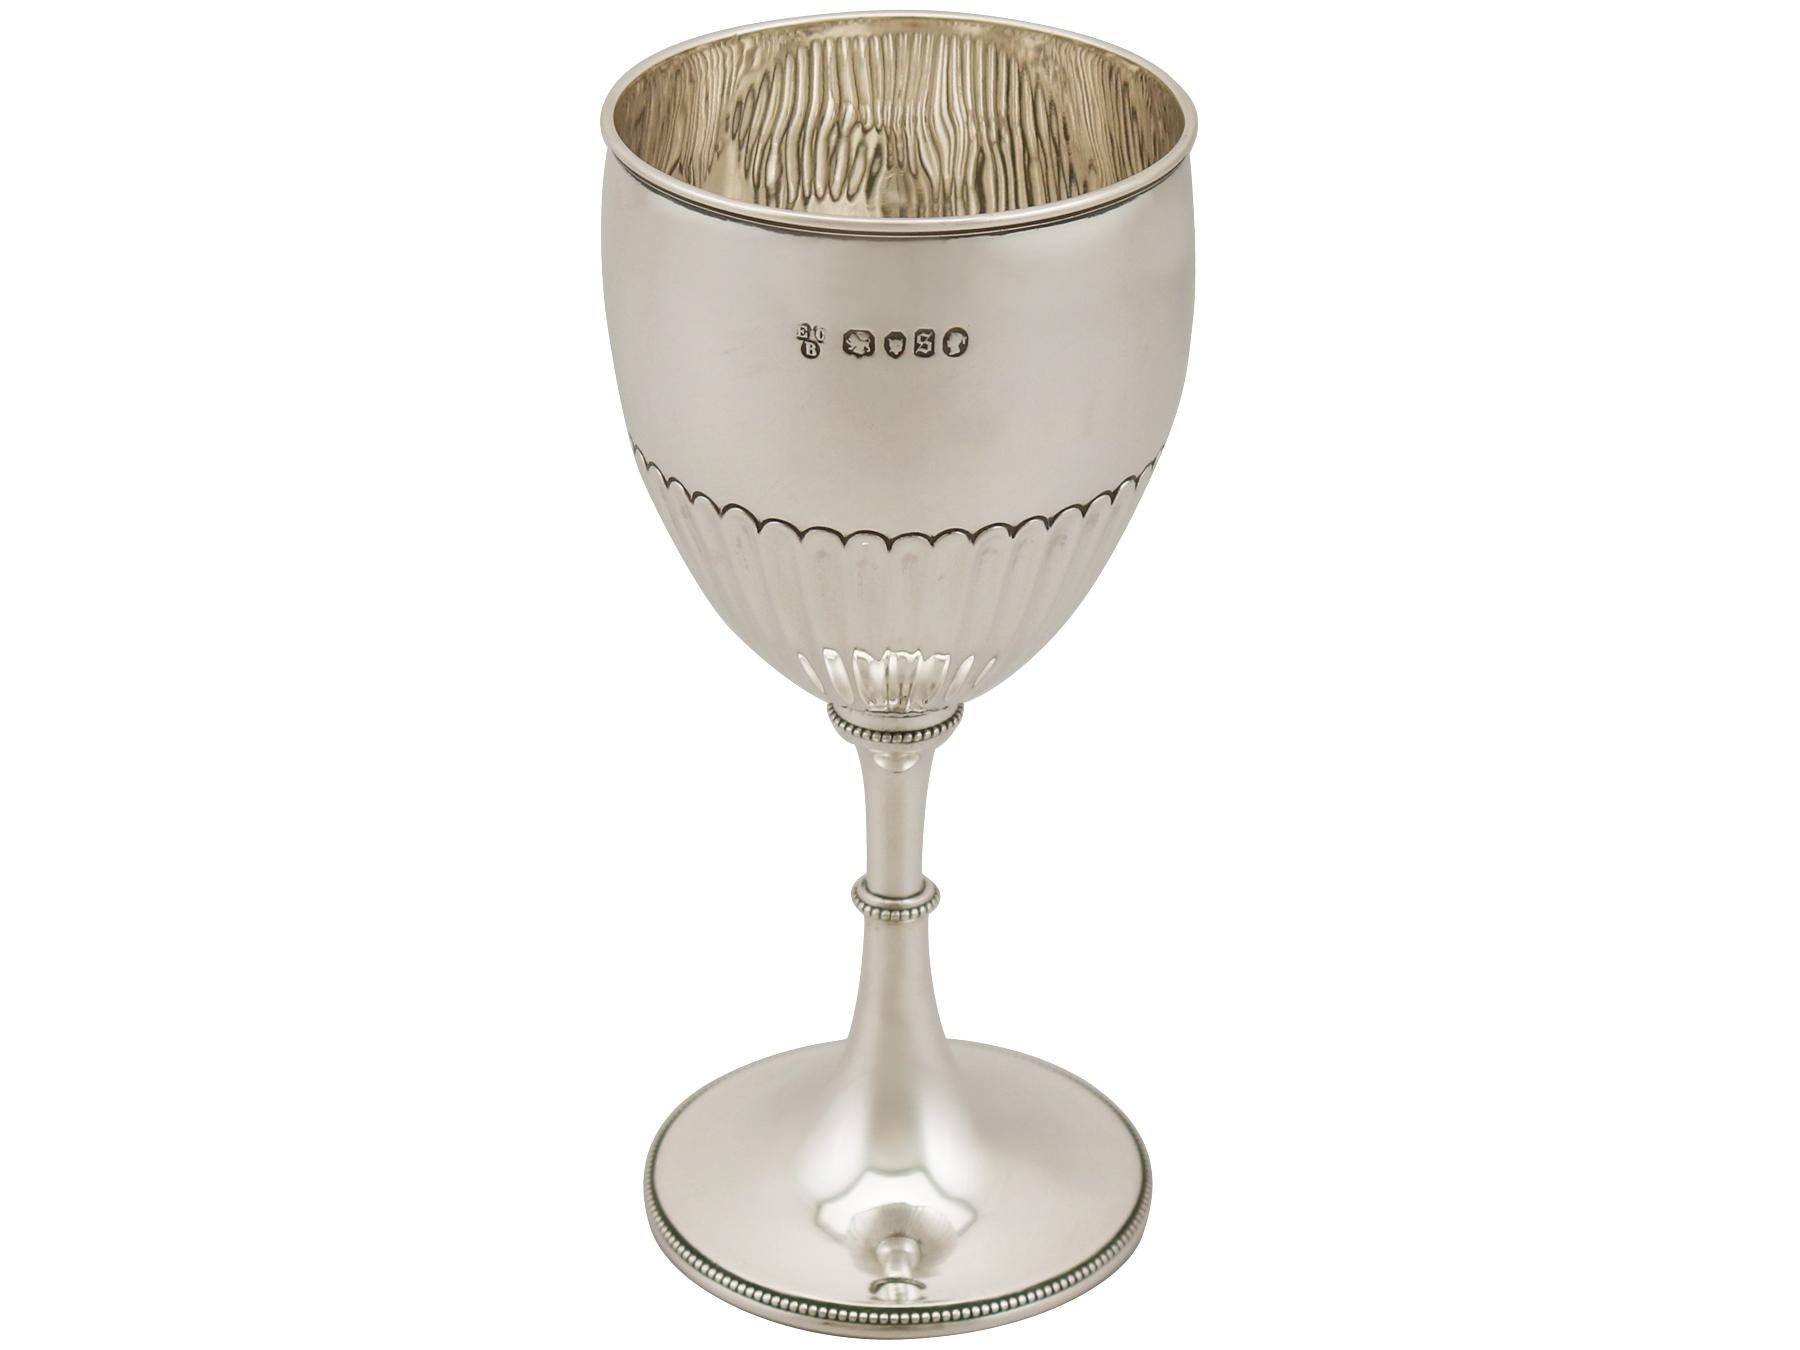 An exceptional, fine and impressive antique Victorian English sterling silver goblet; an addition to our collection of wine and drinks related silverware.

This exceptional antique Victorian sterling silver goblet has a circular bell shaped form